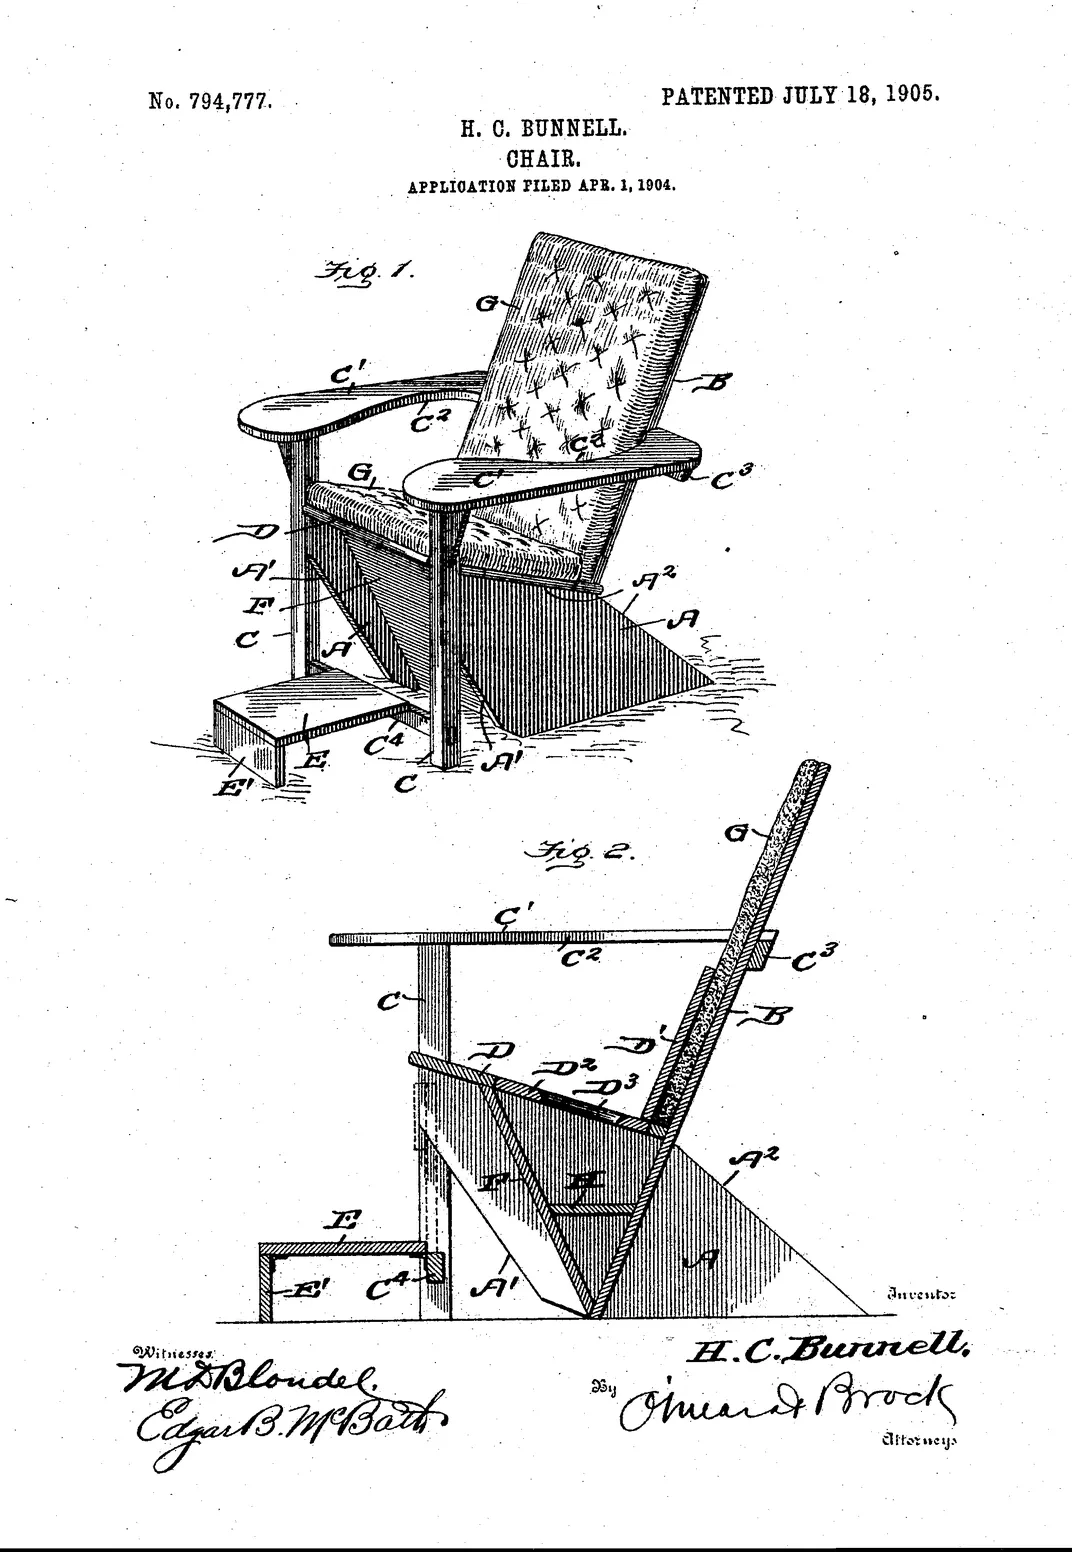 How the Adirondack Chair Became the Feel-Good Recliner That Cures What Ails You